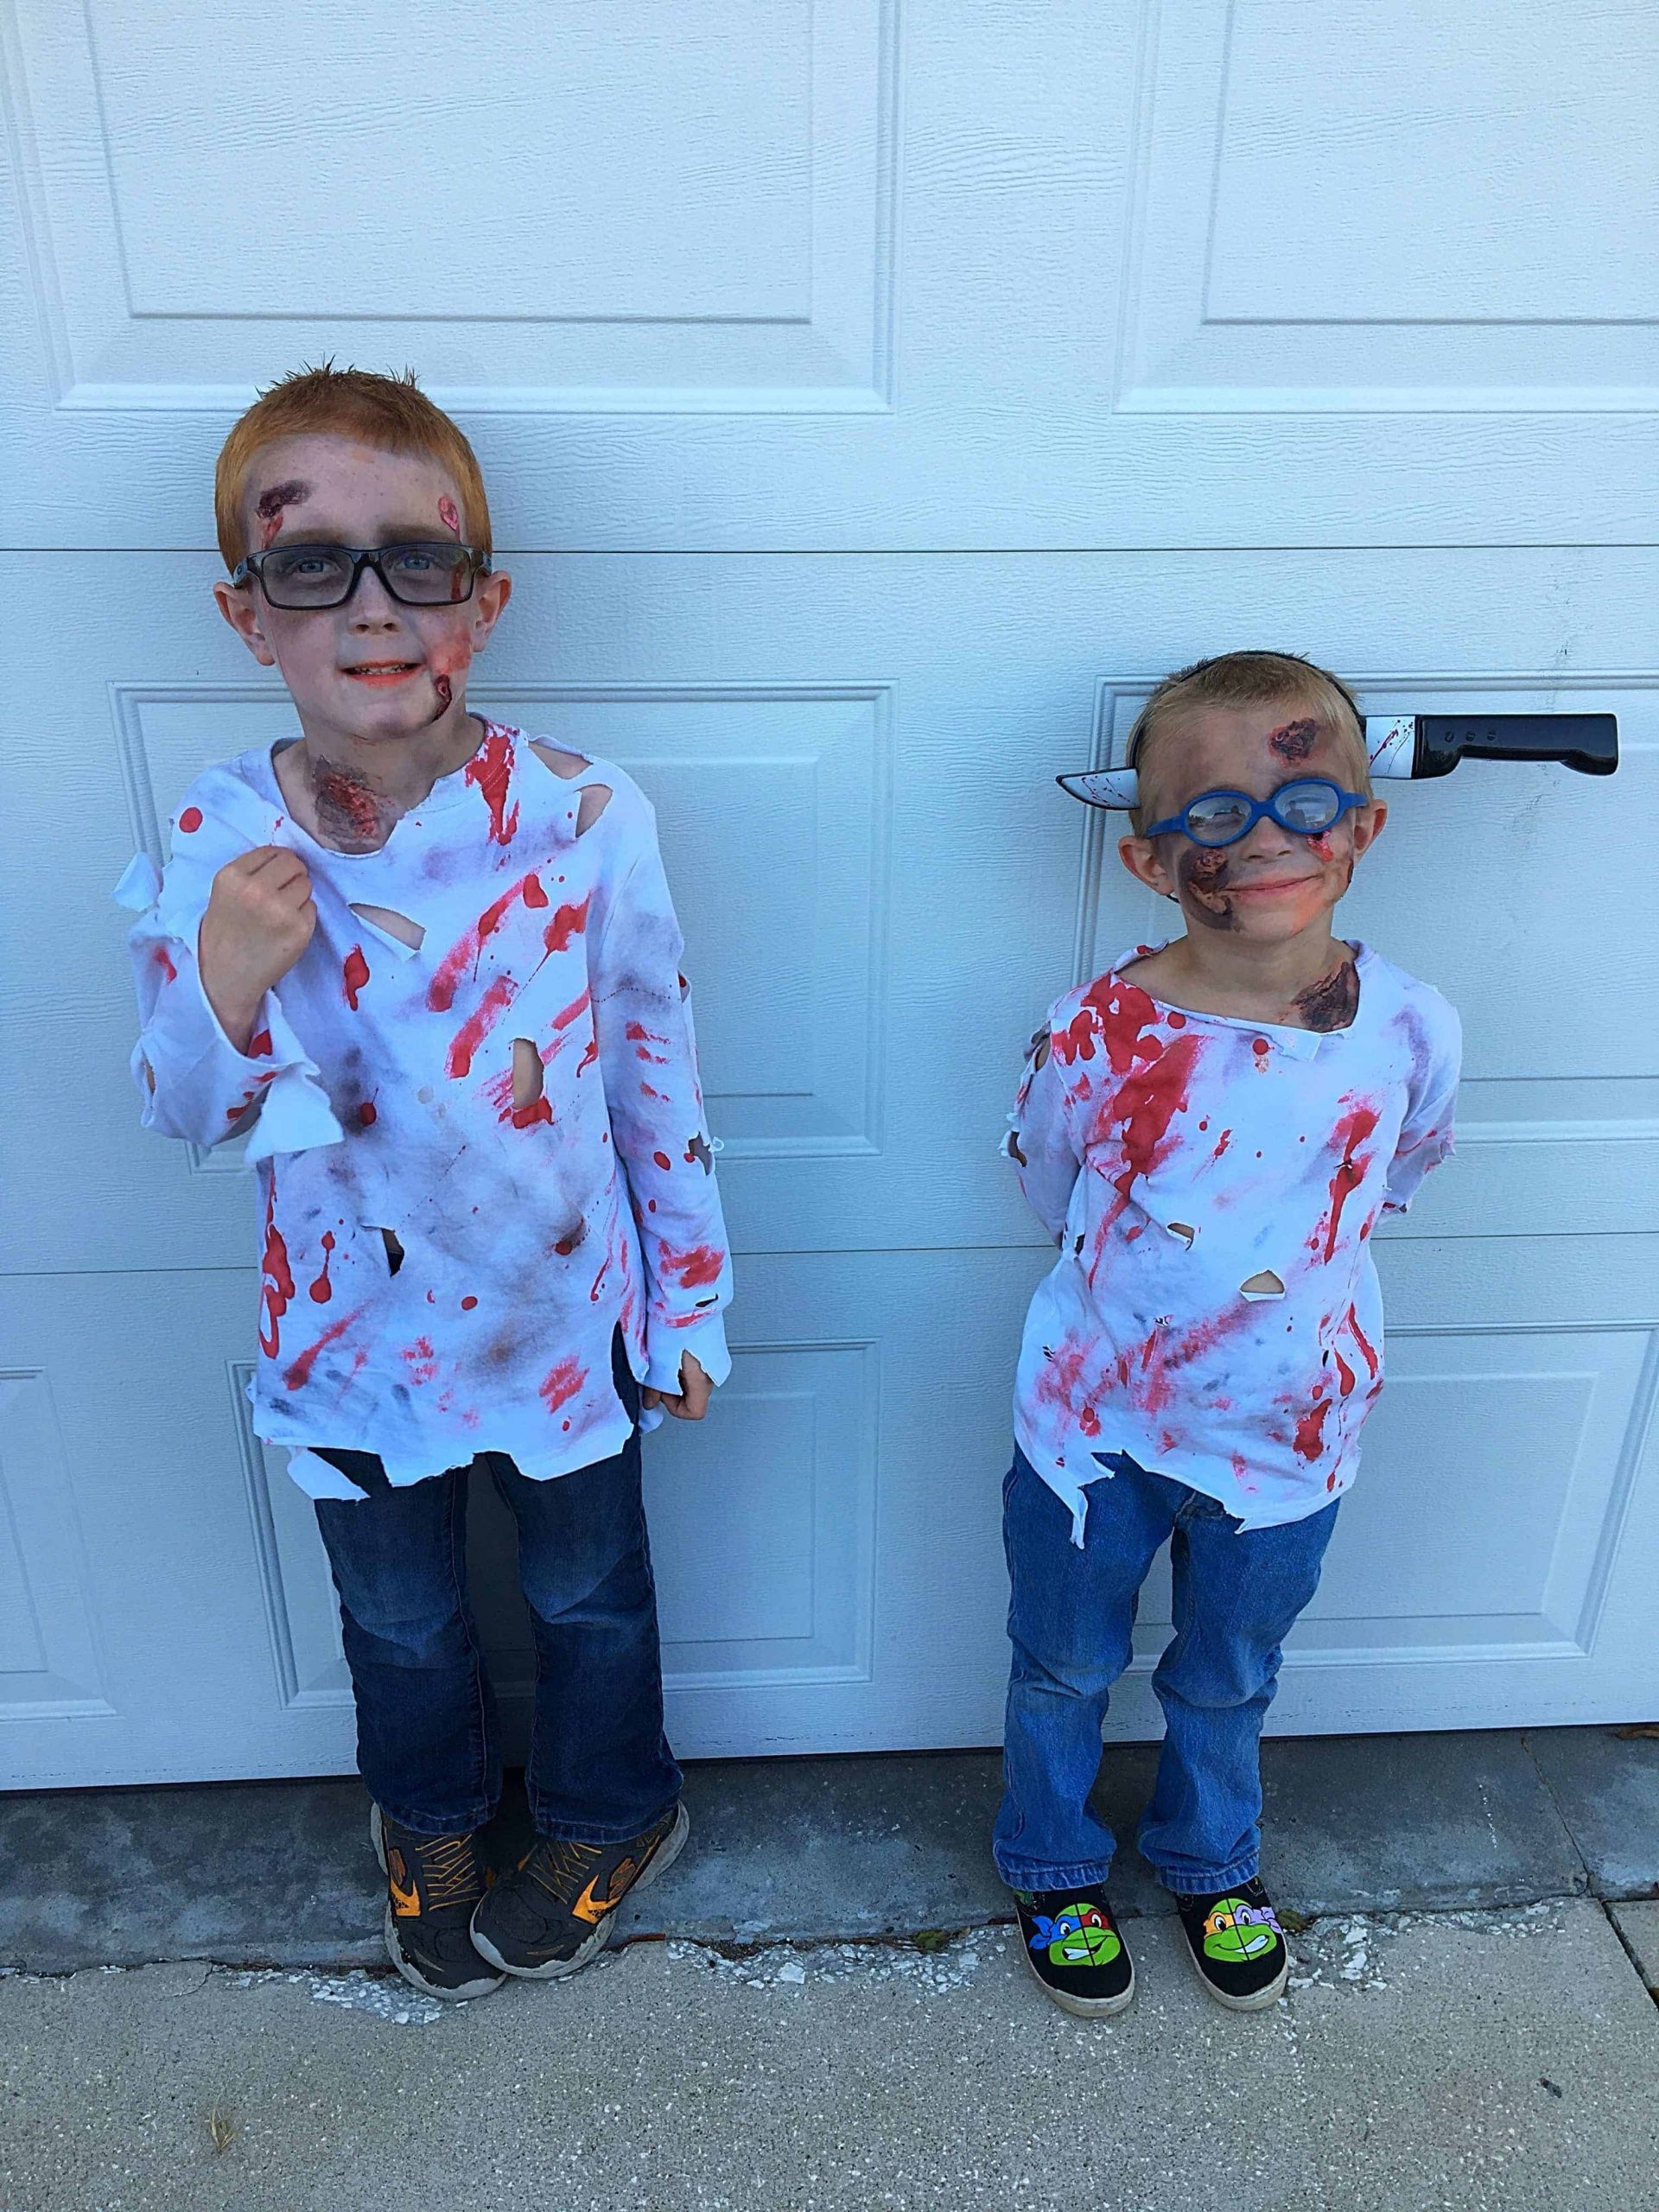 DIY Zombie Costume For Kids
 DIY Halloween Zombie Makeup and Costume Kindly Unspoken